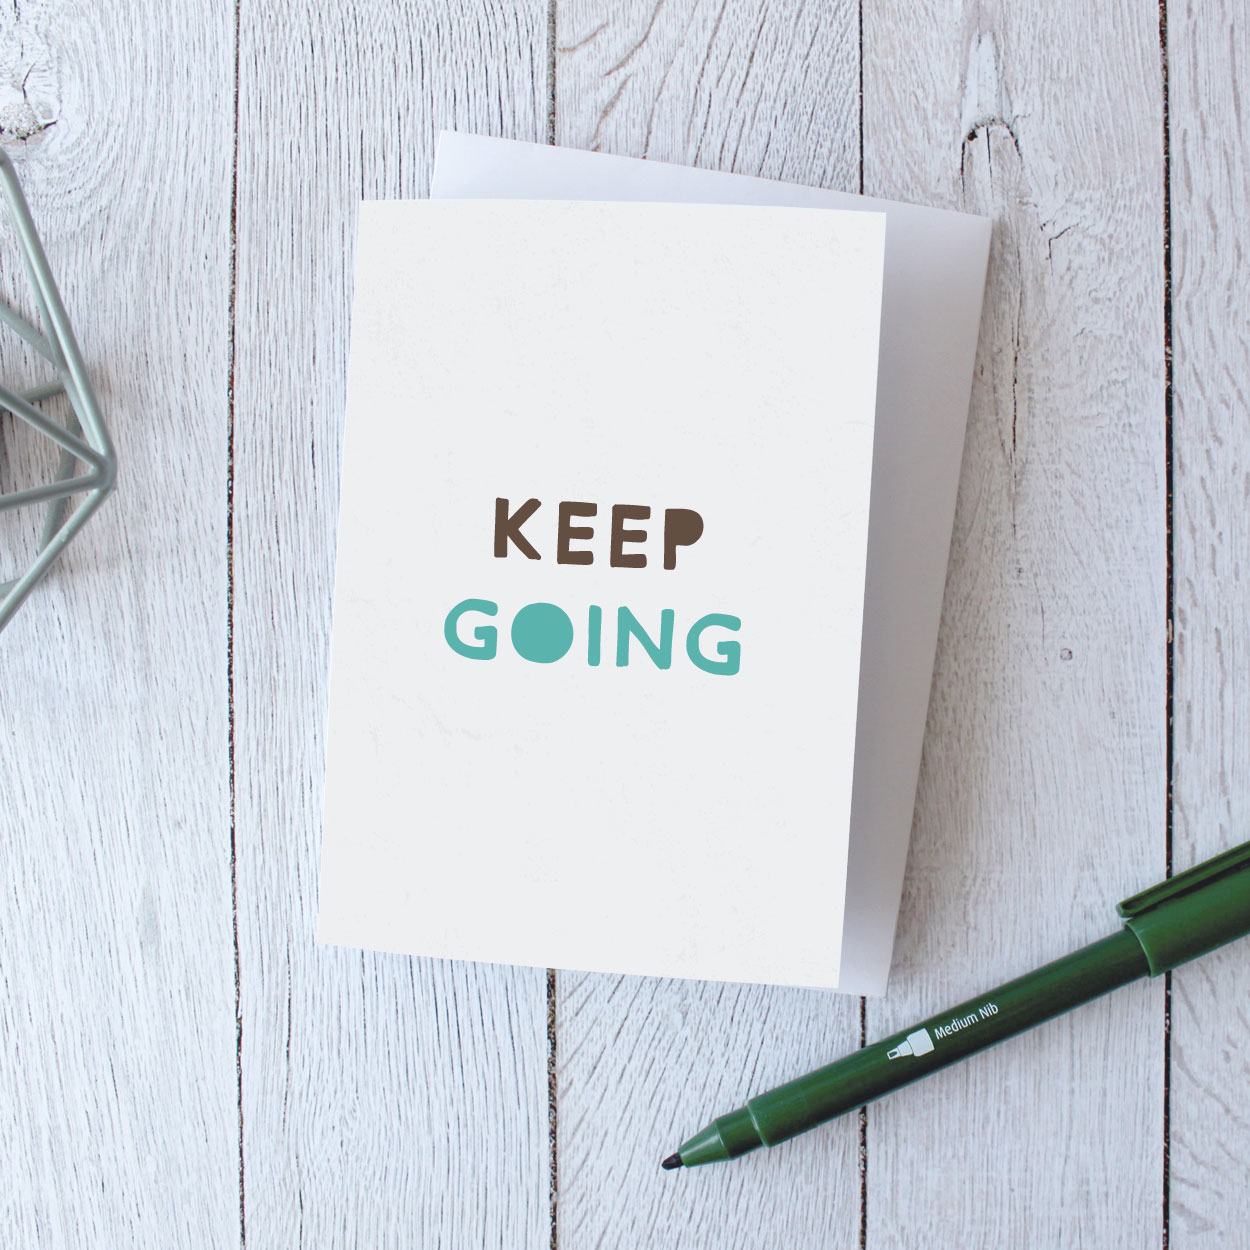 Encouragement Greetings Card | Keep Going - Itty Bitty Book Co Inspirational Quote Greeting Cards, Positivity, gift